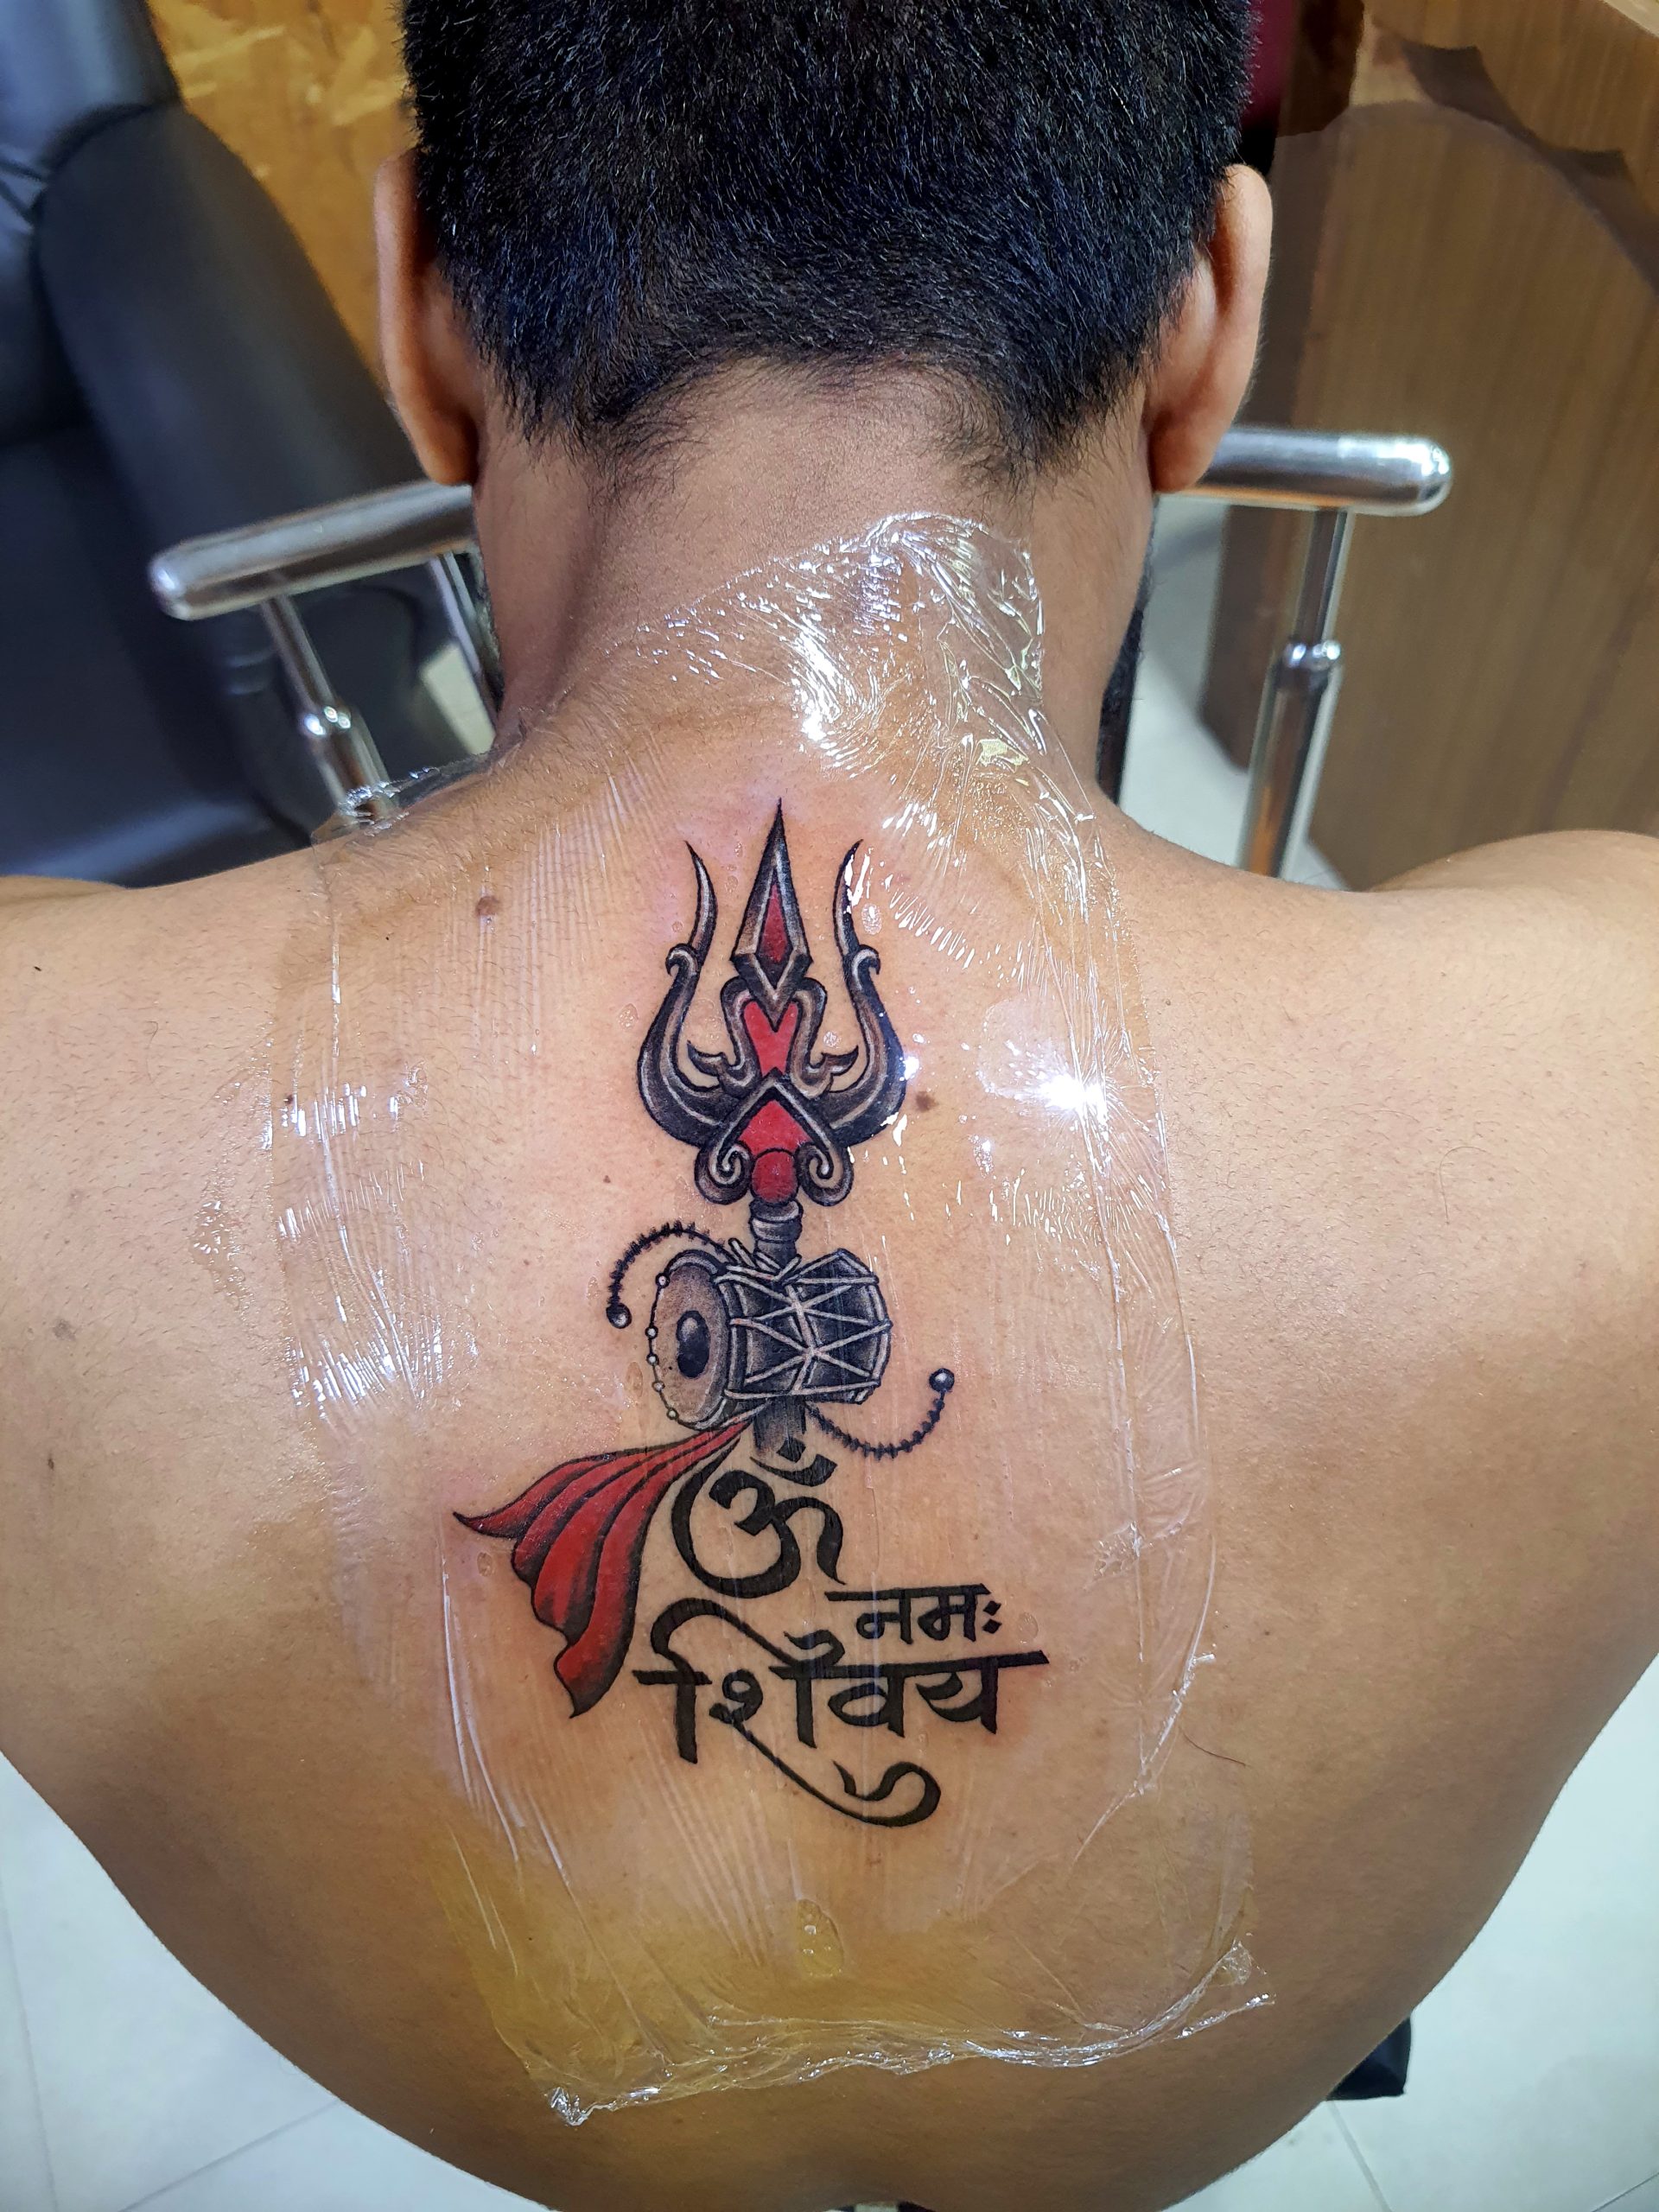 23 Tattoos For Good Luck: Symbols Of Protection And Positive Energy » One  Of India's Best Tattoo Studios In Bangalore - Eternal Expression | Best  Tattoo Artist In Bangalore | Best Tattoo